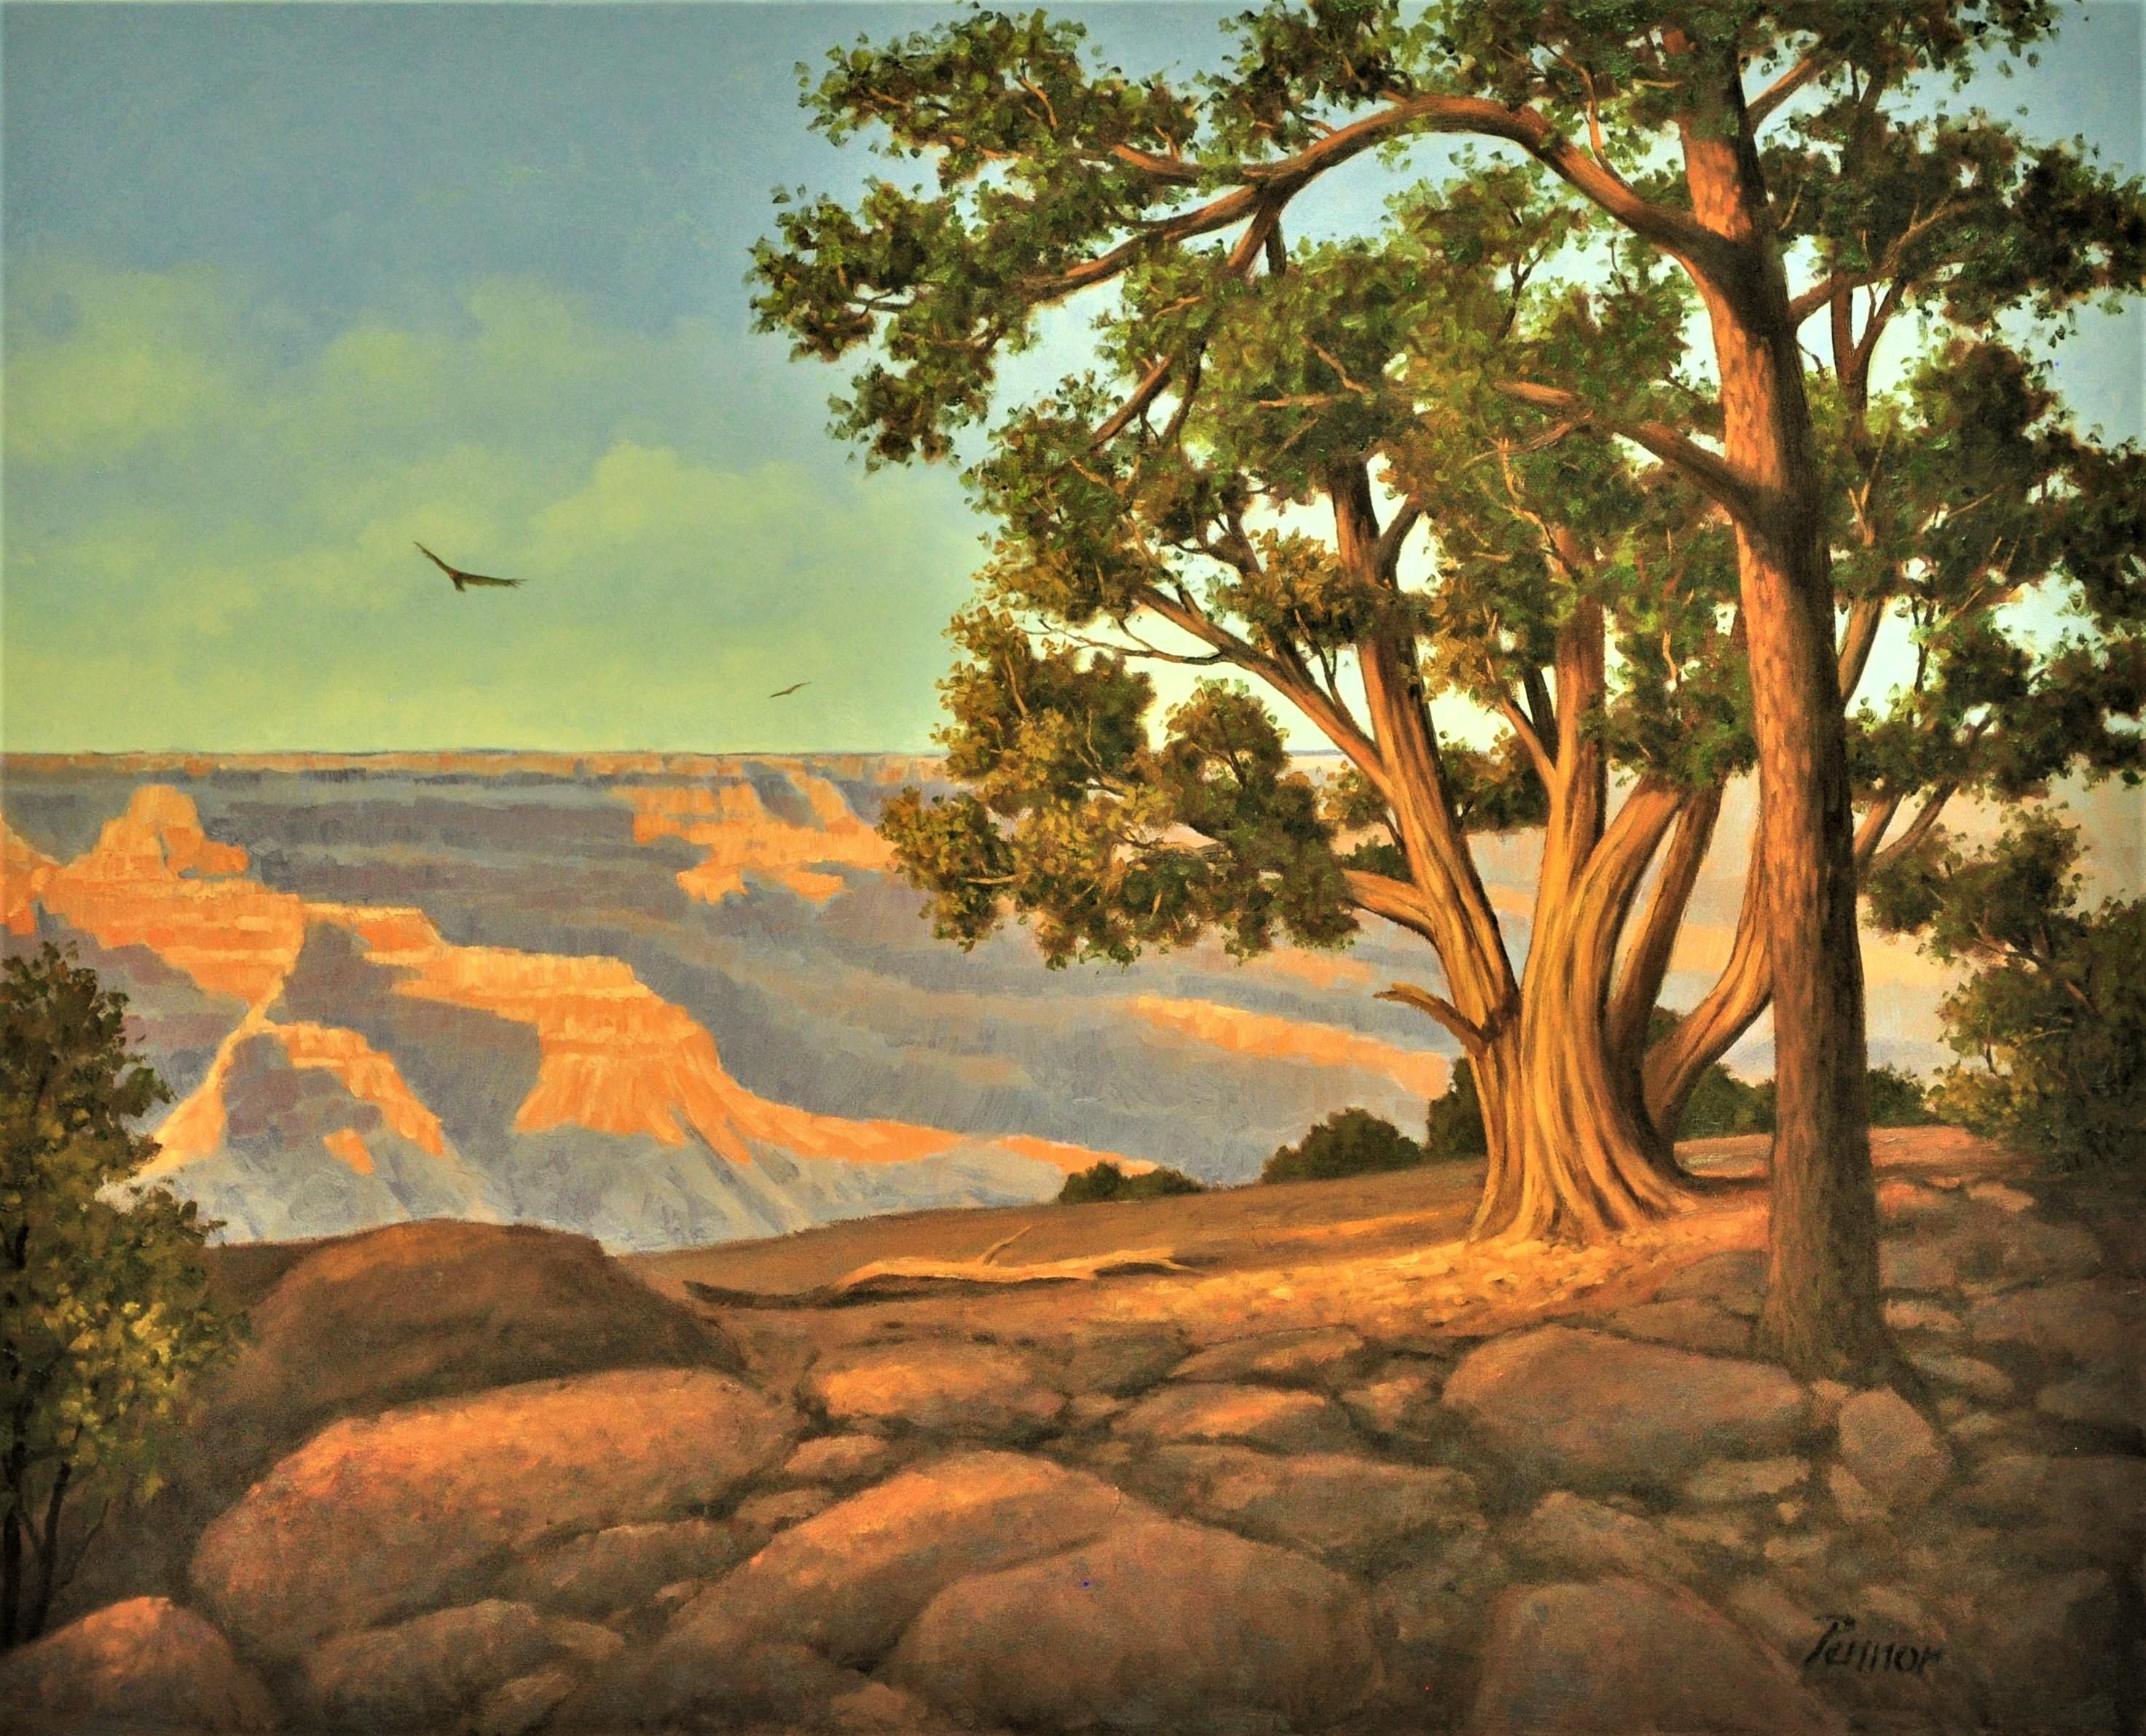 Robert Pennor Landscape Painting - Grand Canyon View